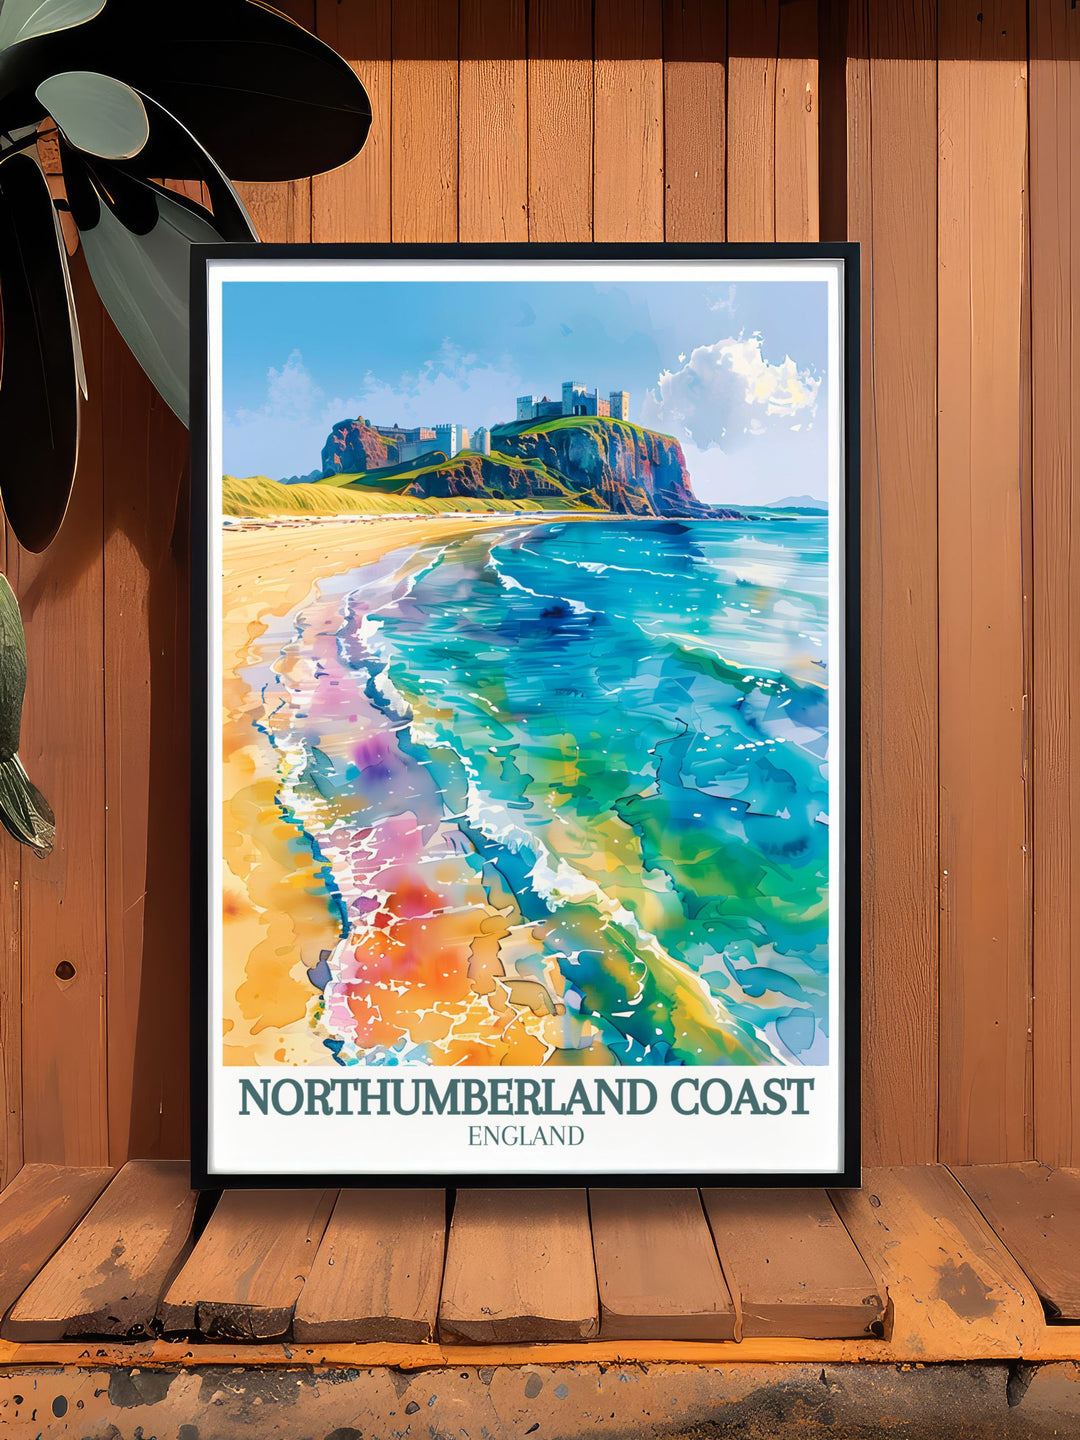 Seahouses Poster with the impressive Bamburgh Castle and Dunstanburgh Castle in the background bringing the charm of Northumberlands coastal village into your home decor with detailed artistry